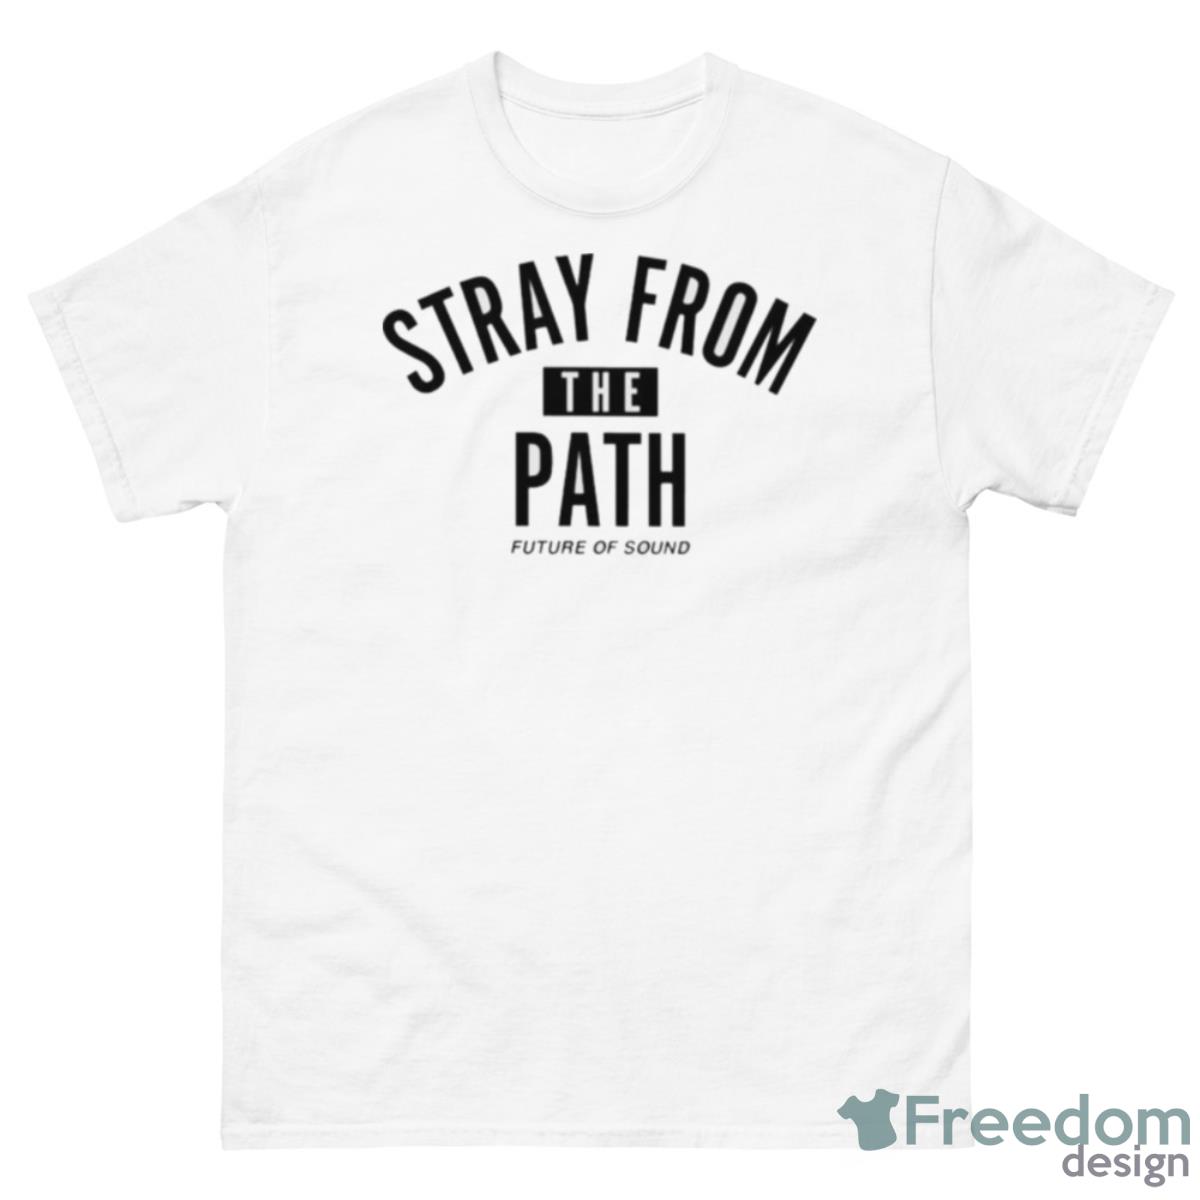 Stray From The Path Future Of Sound Shirt - 500 Men’s Classic Tee Gildan